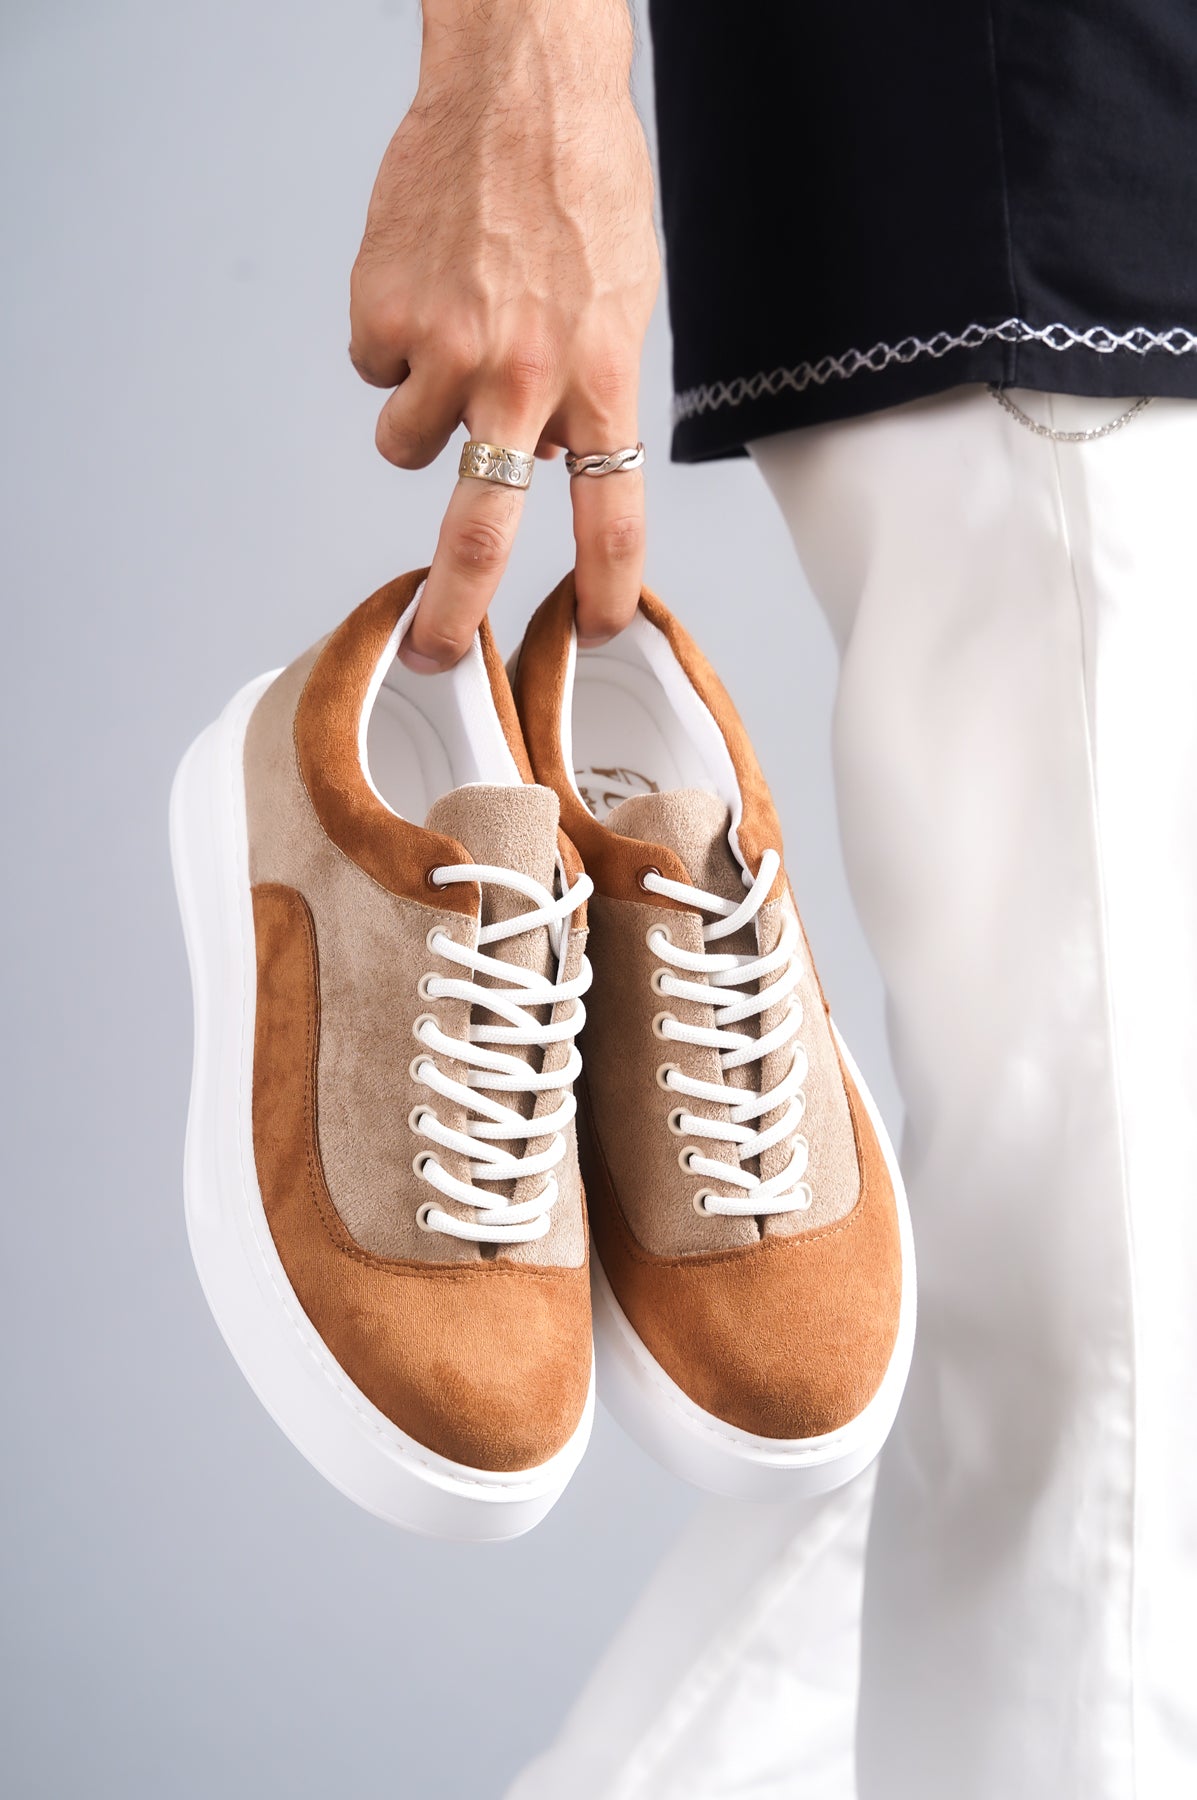 KB-005 Mink Tan Suede Laced Casual Men's Sneakers Shoes - STREETMODE ™